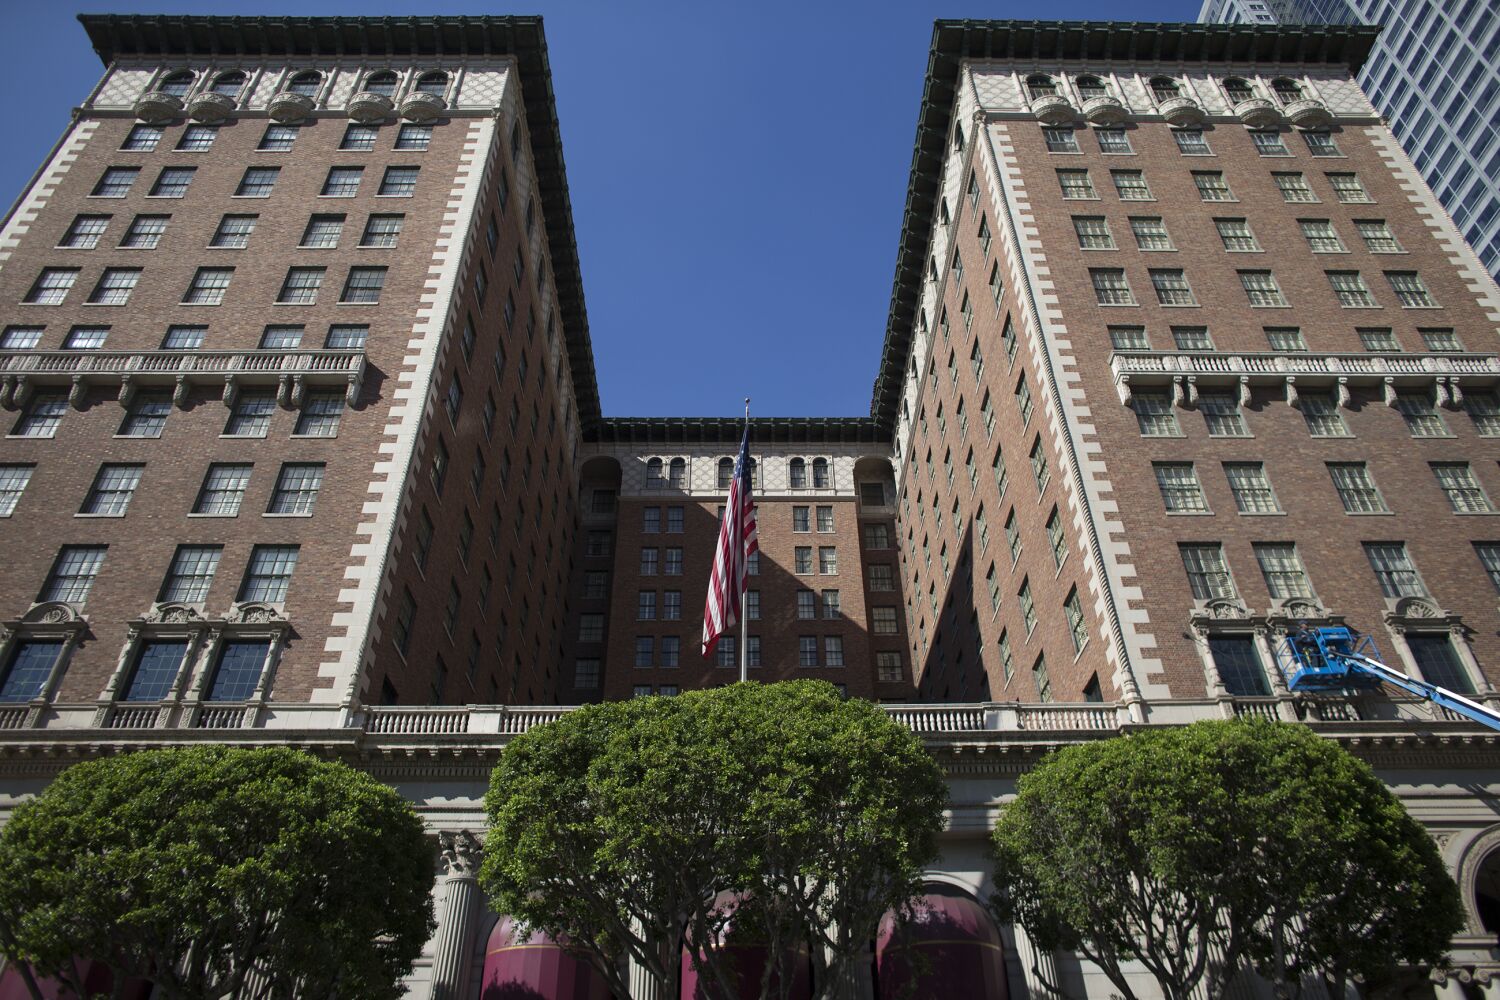 'We have no placement for them': L.A. County still keeping troubled youths in hotel rooms